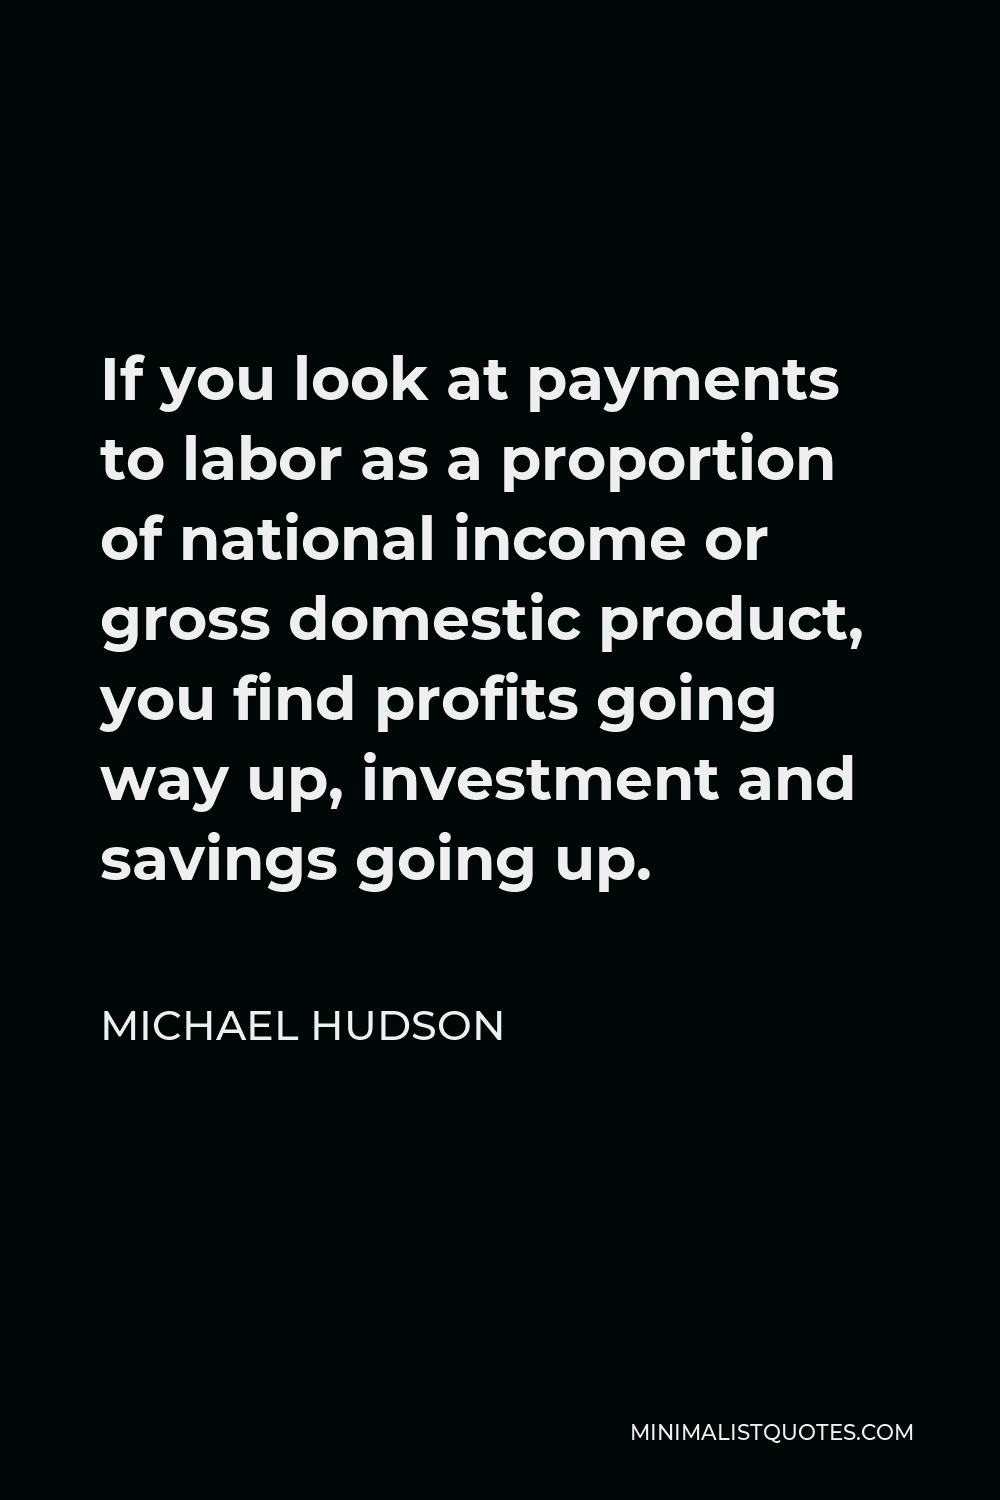 Michael Hudson Quote - If you look at payments to labor as a proportion of national income or gross domestic product, you find profits going way up, investment and savings going up.